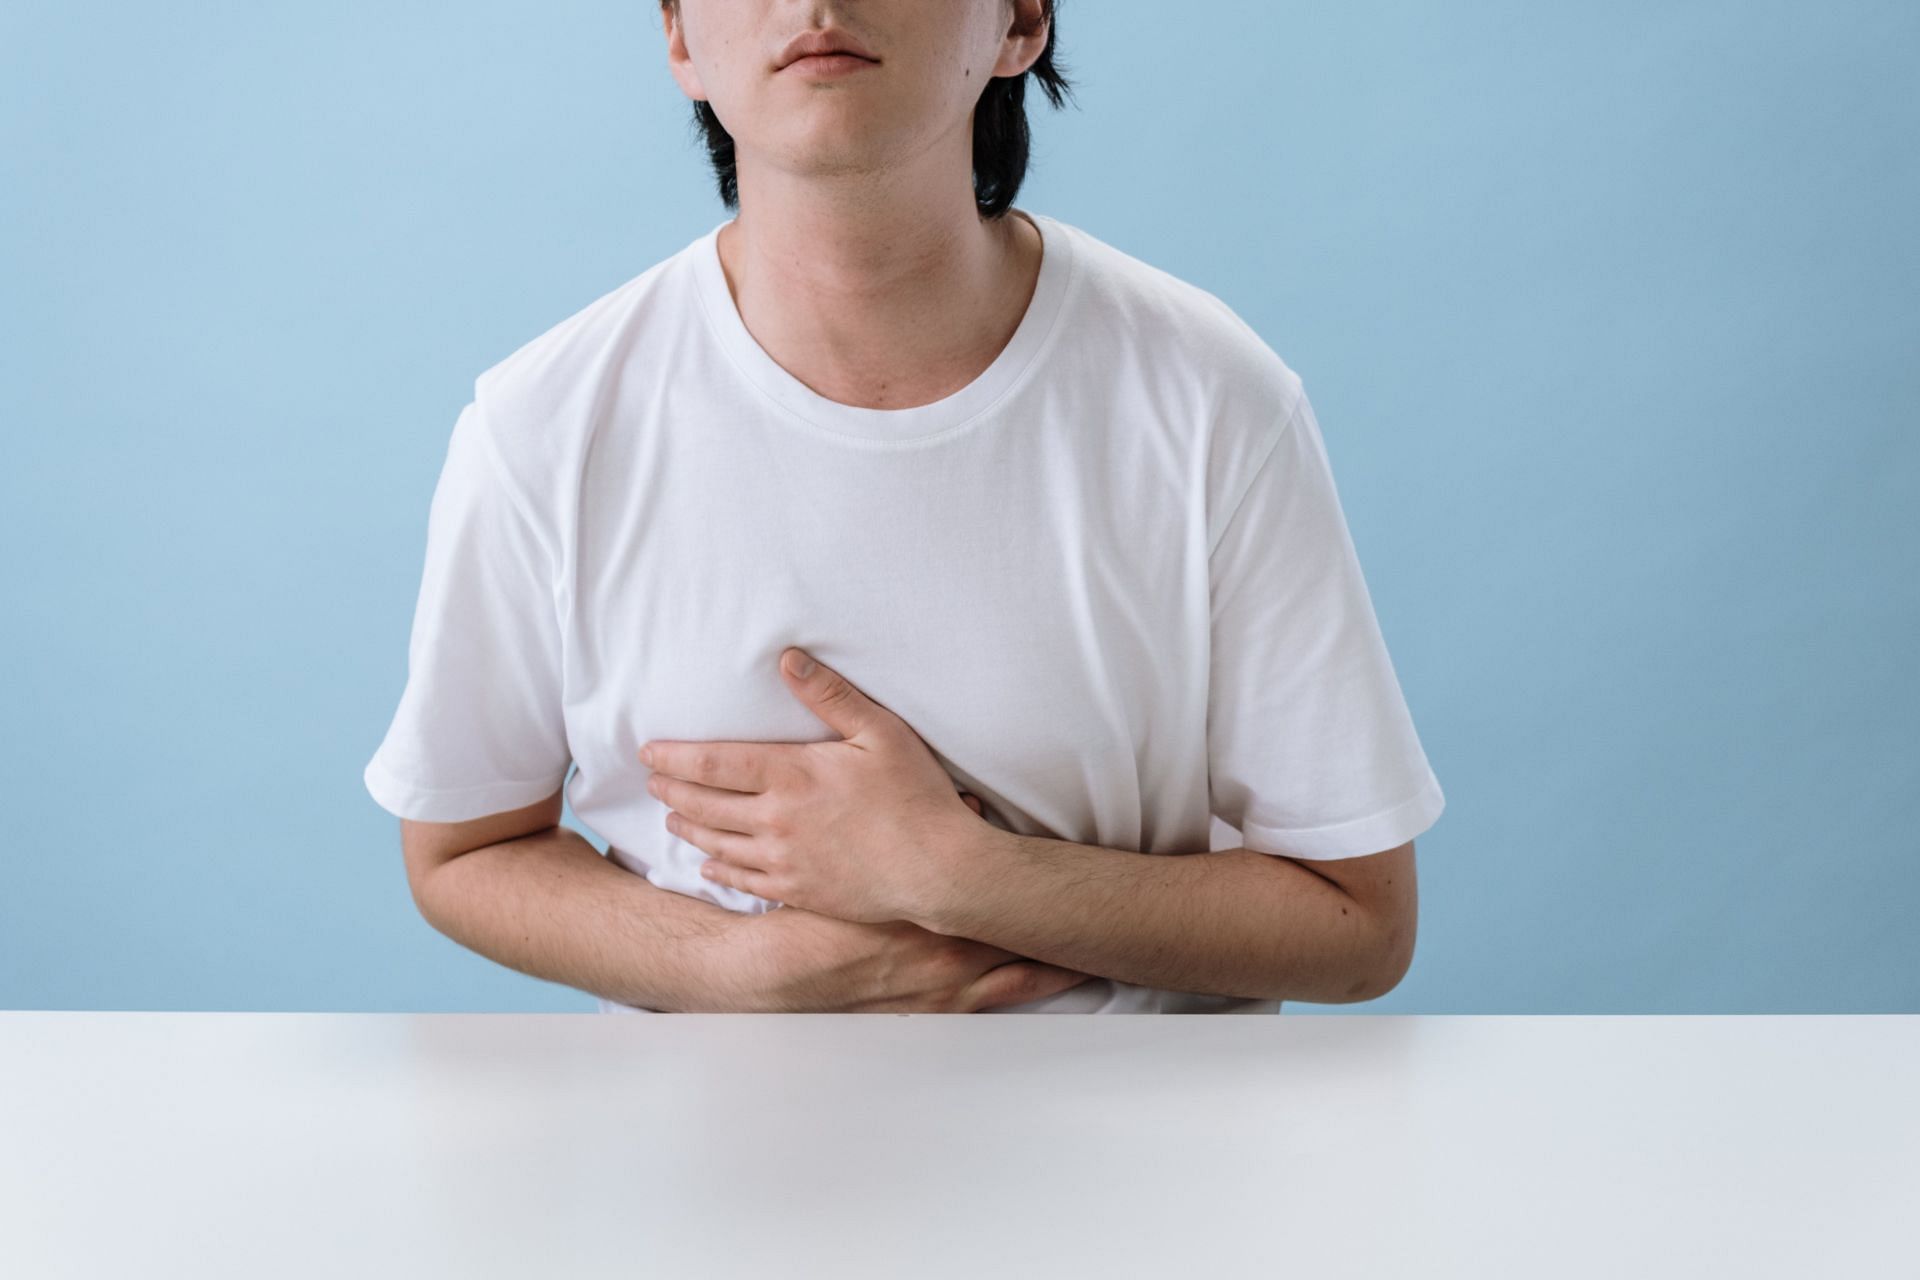 Signs of stomach ulcer include indigestion and burning sensation. (Image via Pexels/ Cottonbro Studio)